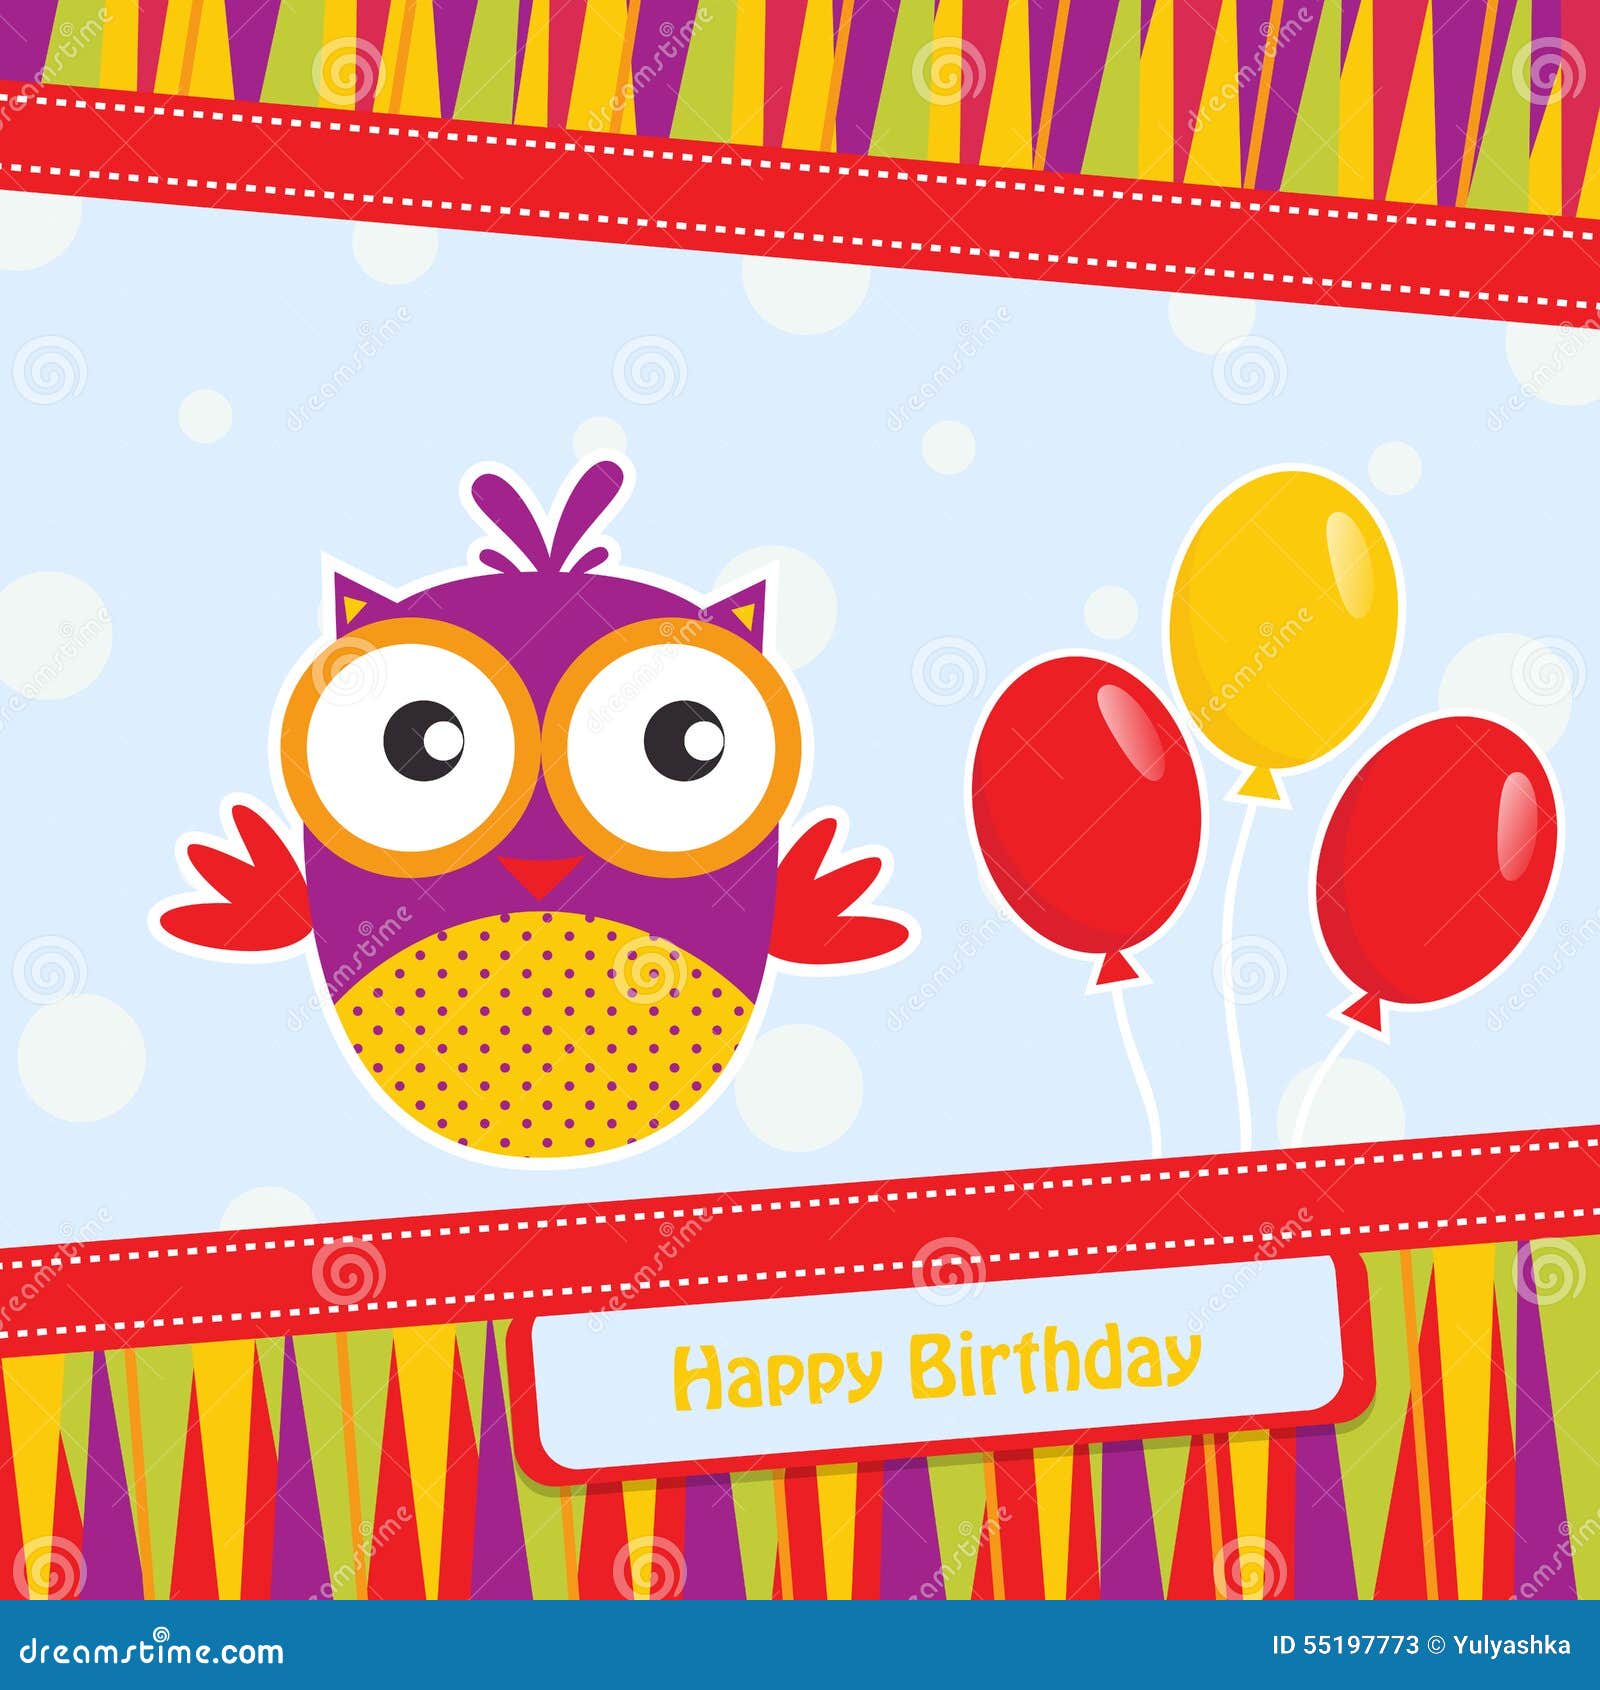 Birthday Template Greeting Card Stock Vector - Illustration of baby ...